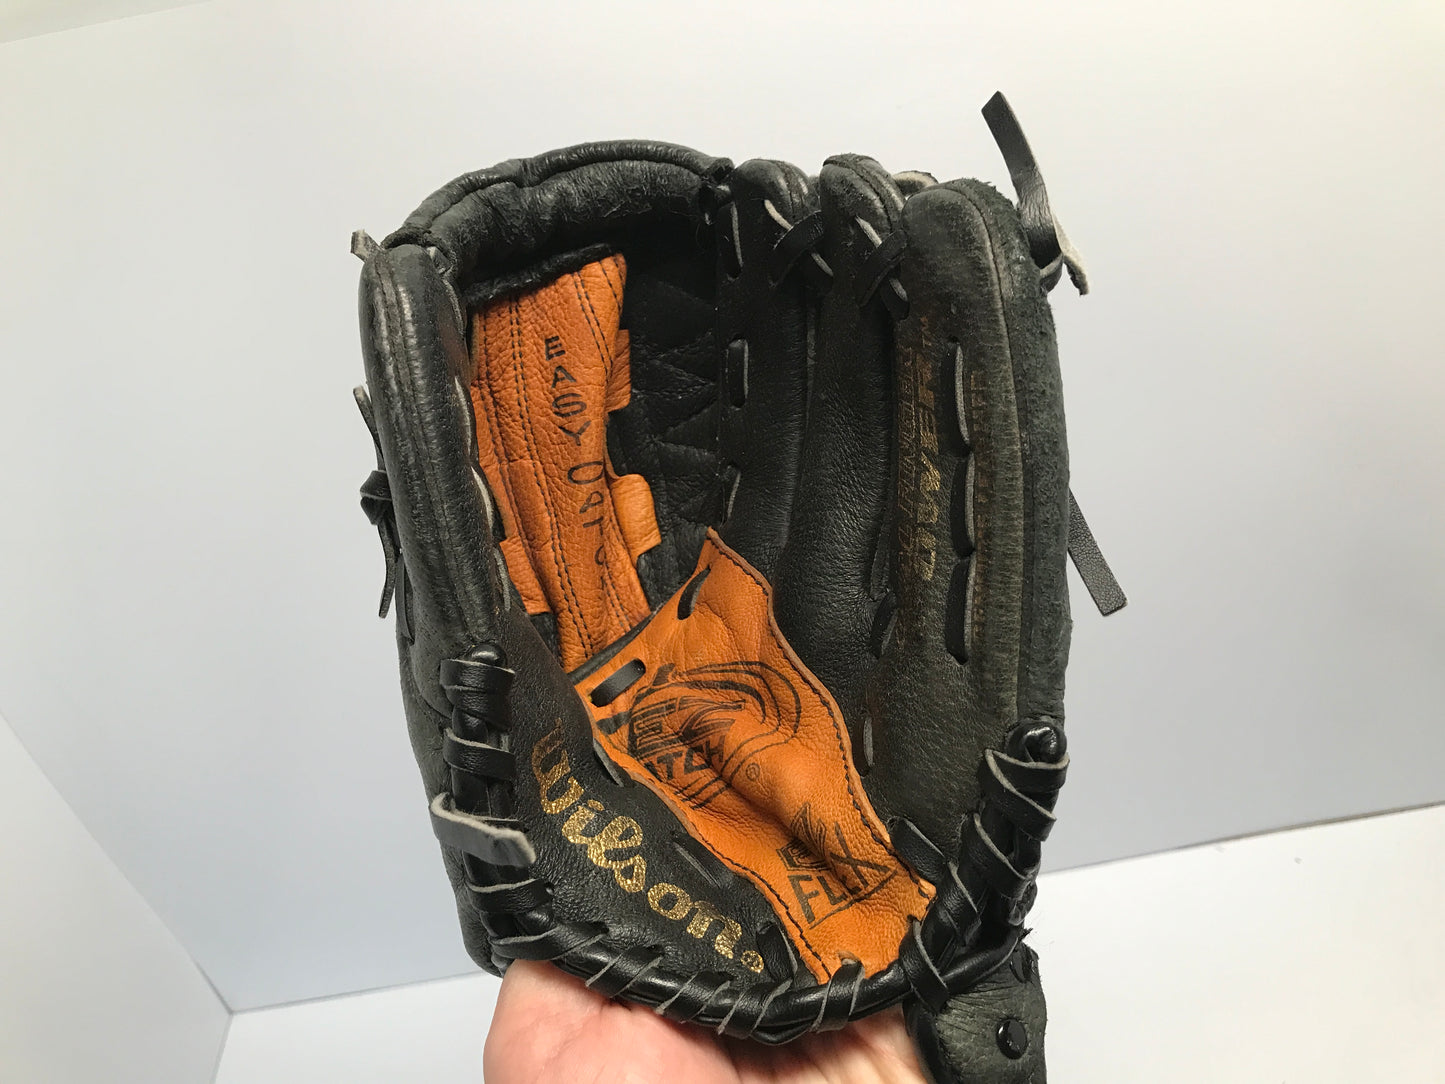 Baseball Glove Child Size 9.5in Wilson Black Tan Leather Fits On Left Hand